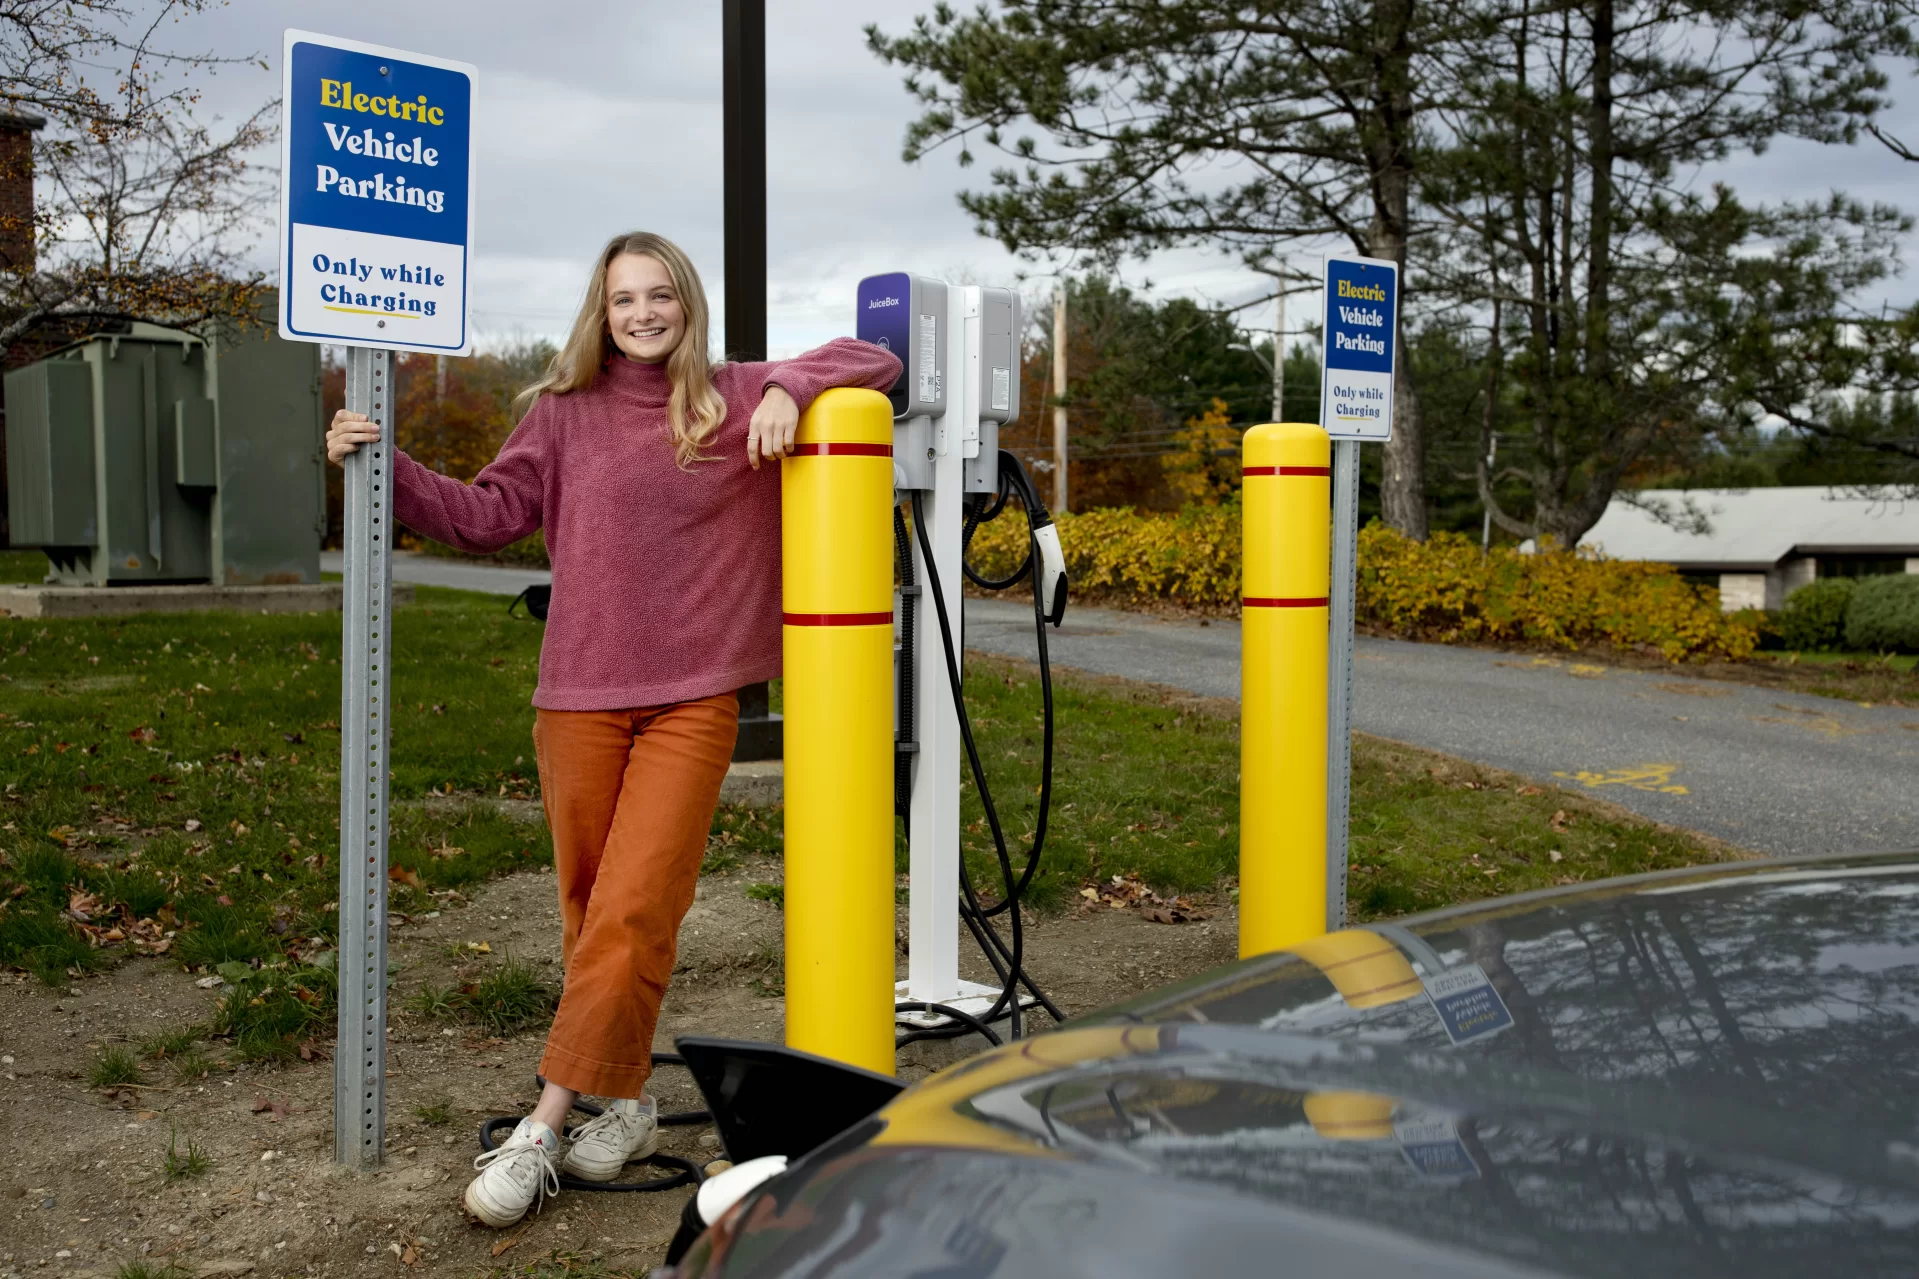 Ecorep Tamsin Stringer ’22 of Bloomington, Ind., poses at the new electric charger stations behind Underhill in the Merrill Gym parking lot.

“Underhill Electric Vehicle Chargers Project “
Bates has installed other EV chargers in the past. This project will be different for three primary reasons. First, we have already received a grant from CMP for the make-ready infrastructure portion of the project, which has historically been the bulk of the expenses for EV charger installations. Secondly, this project will include installing level 2 chargers for the first time at Bates, which will allow for monetary collections for charging, tiered charging for different kinds of customers, and incentivize to move one’s car once it's fully charged. Finally, this project allows for future EV charger installations in the same location for much lower cost, because the make-ready infrastructure for more EV chargers will be easily accessible.